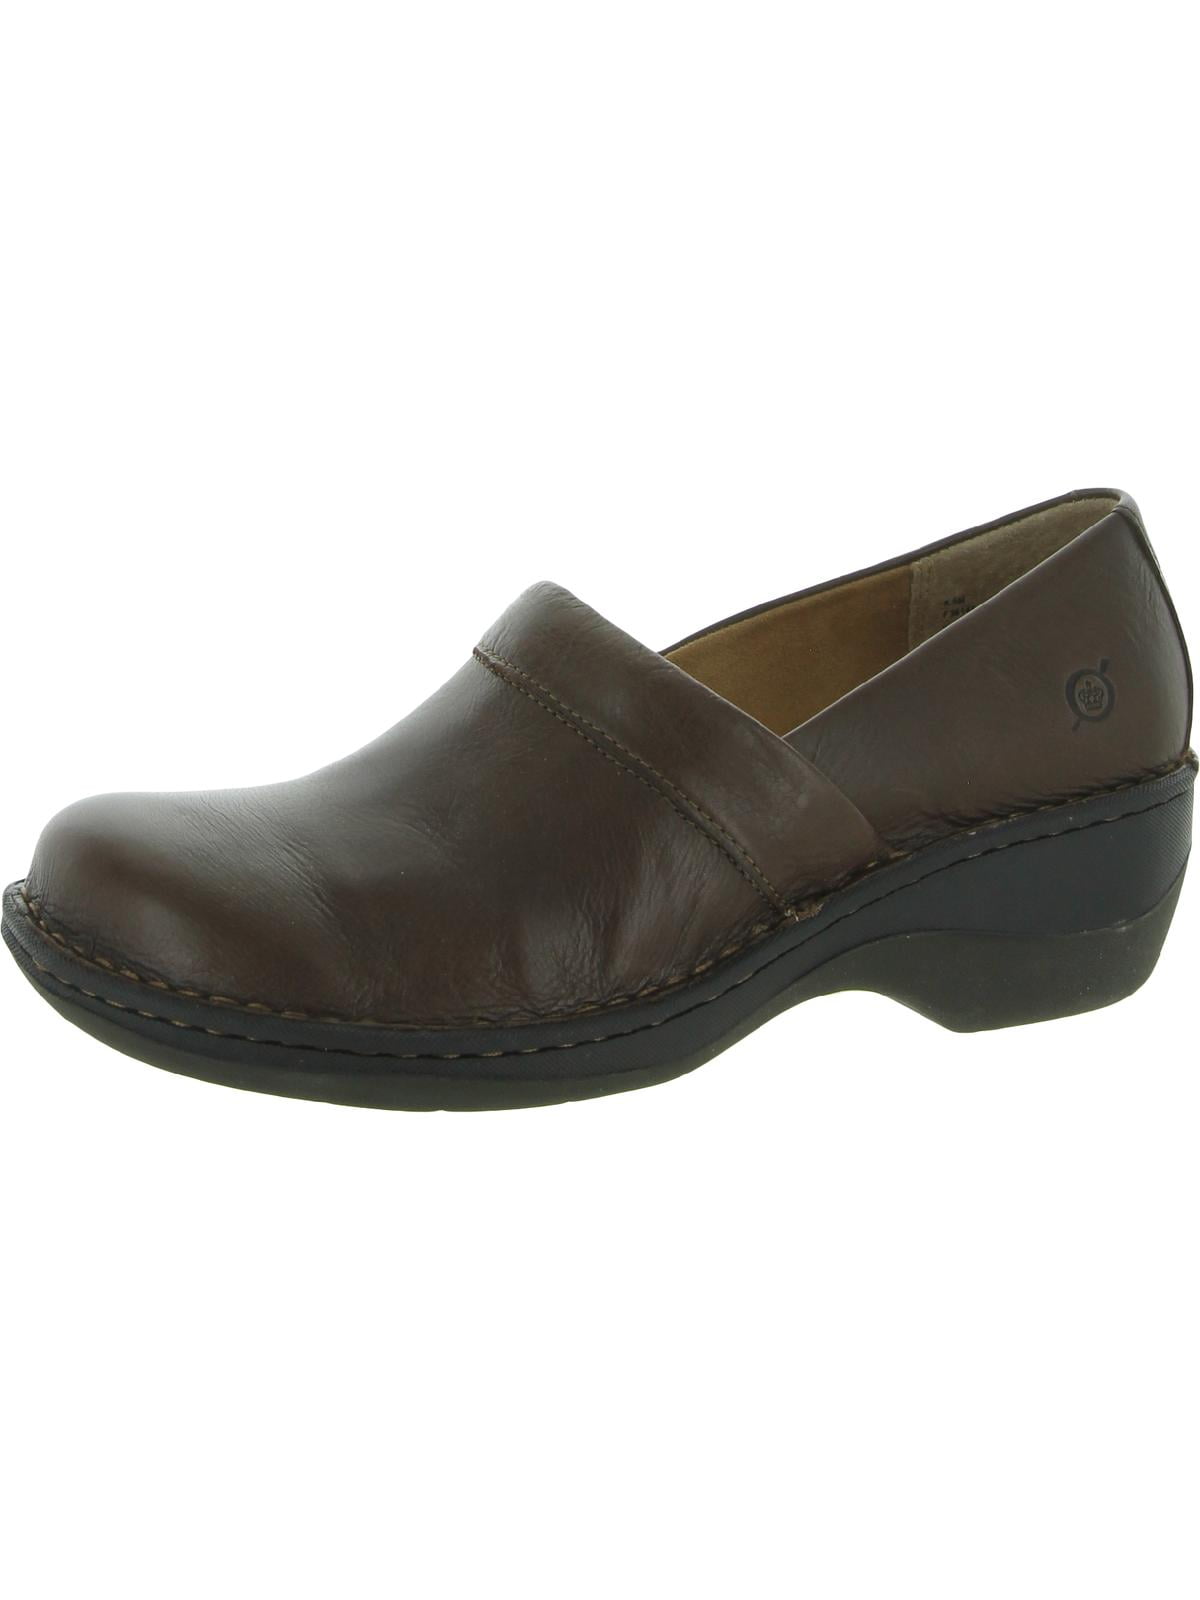 Born Womens Toby Duo Leather Slip On Clogs - Walmart.com